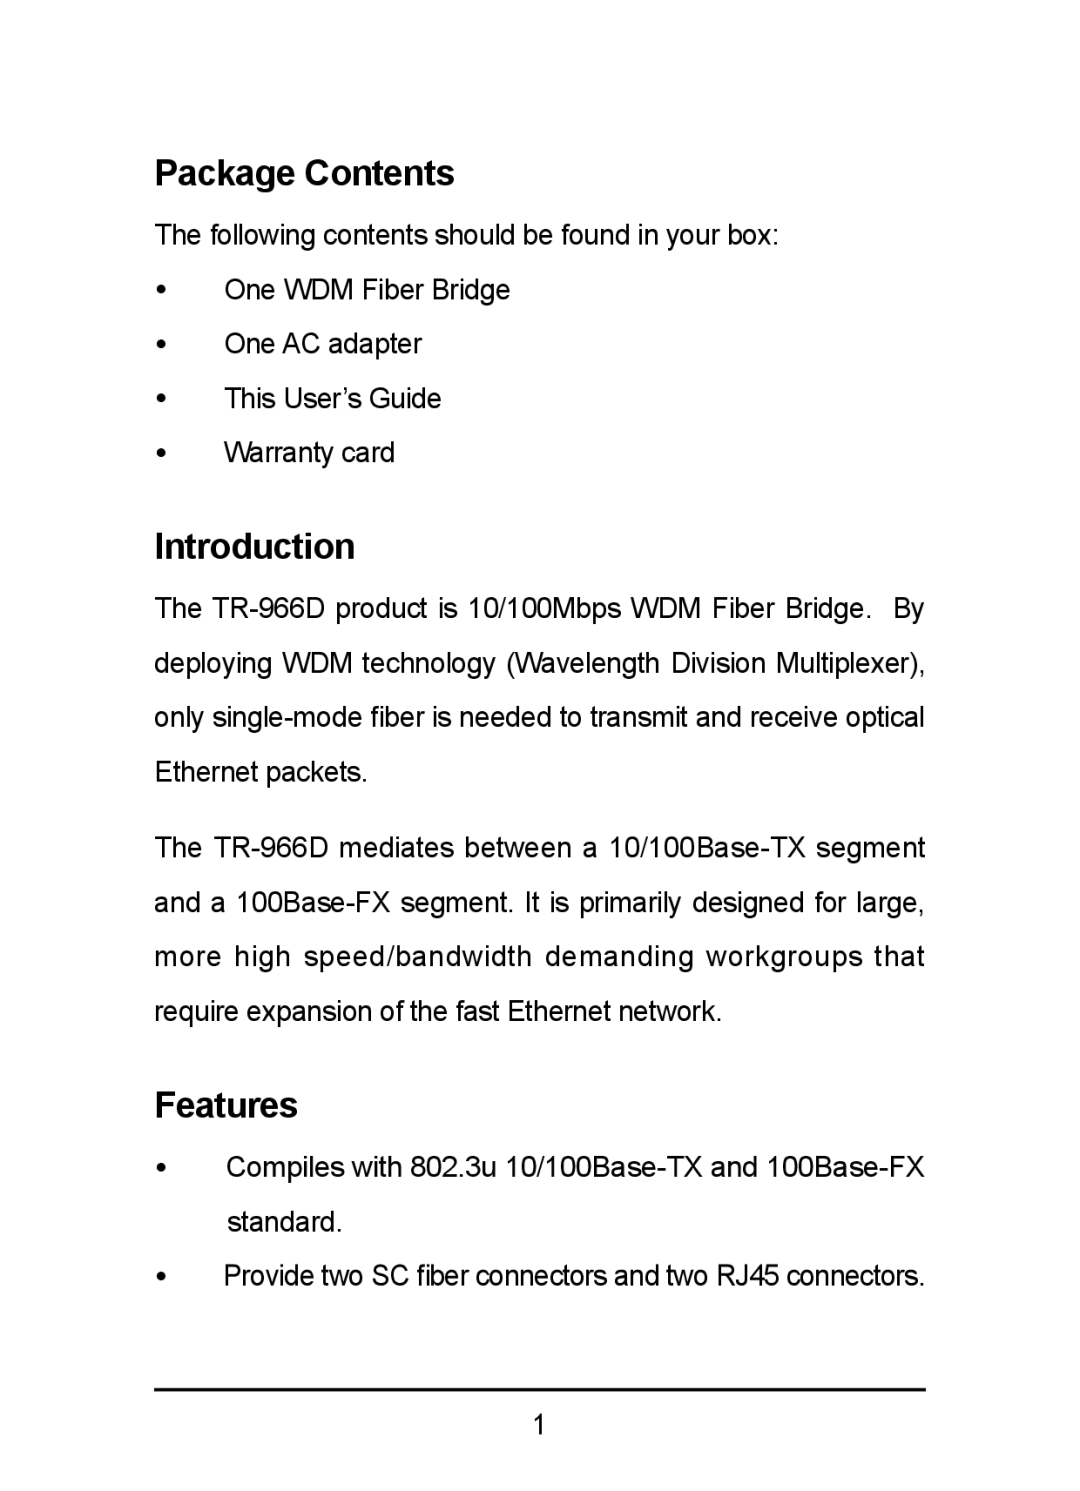 TP-Link TR-966D manual Package Contents, Introduction, Features 